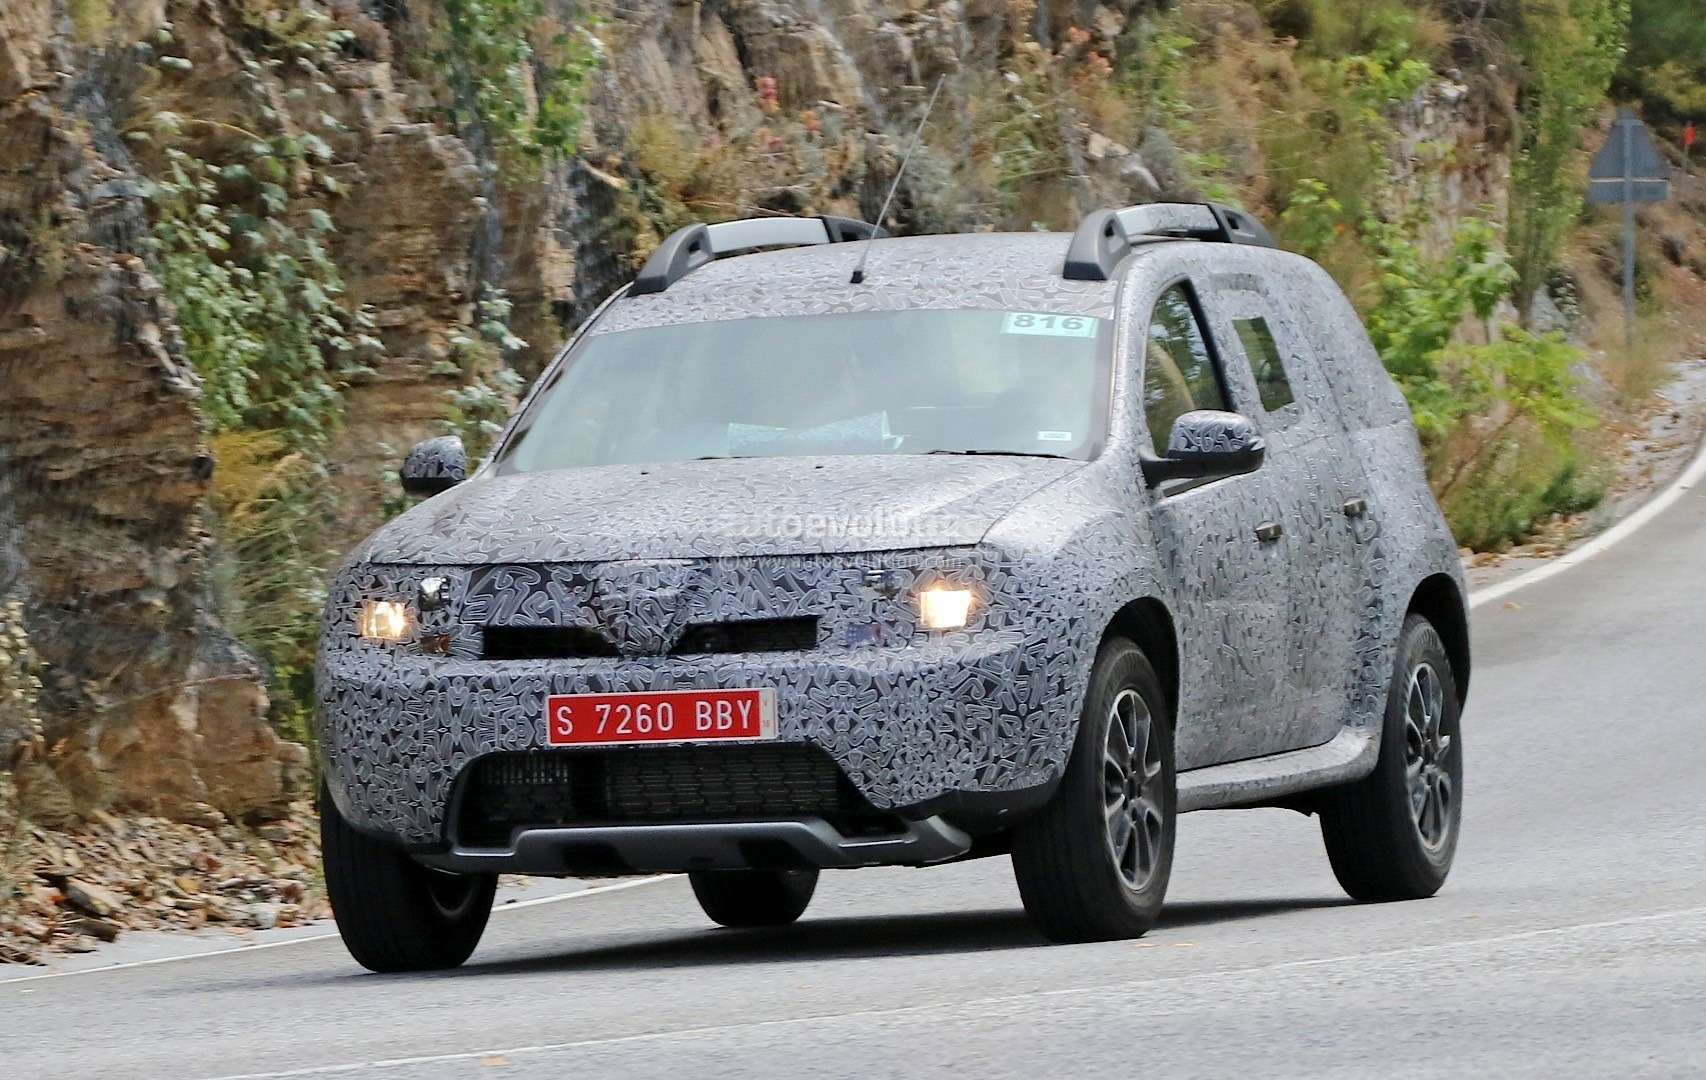 all-new-dacia-duster-caught-in-first-spyshots-plus-dacia-novelties-for-frankfurt-photo-gallery_3